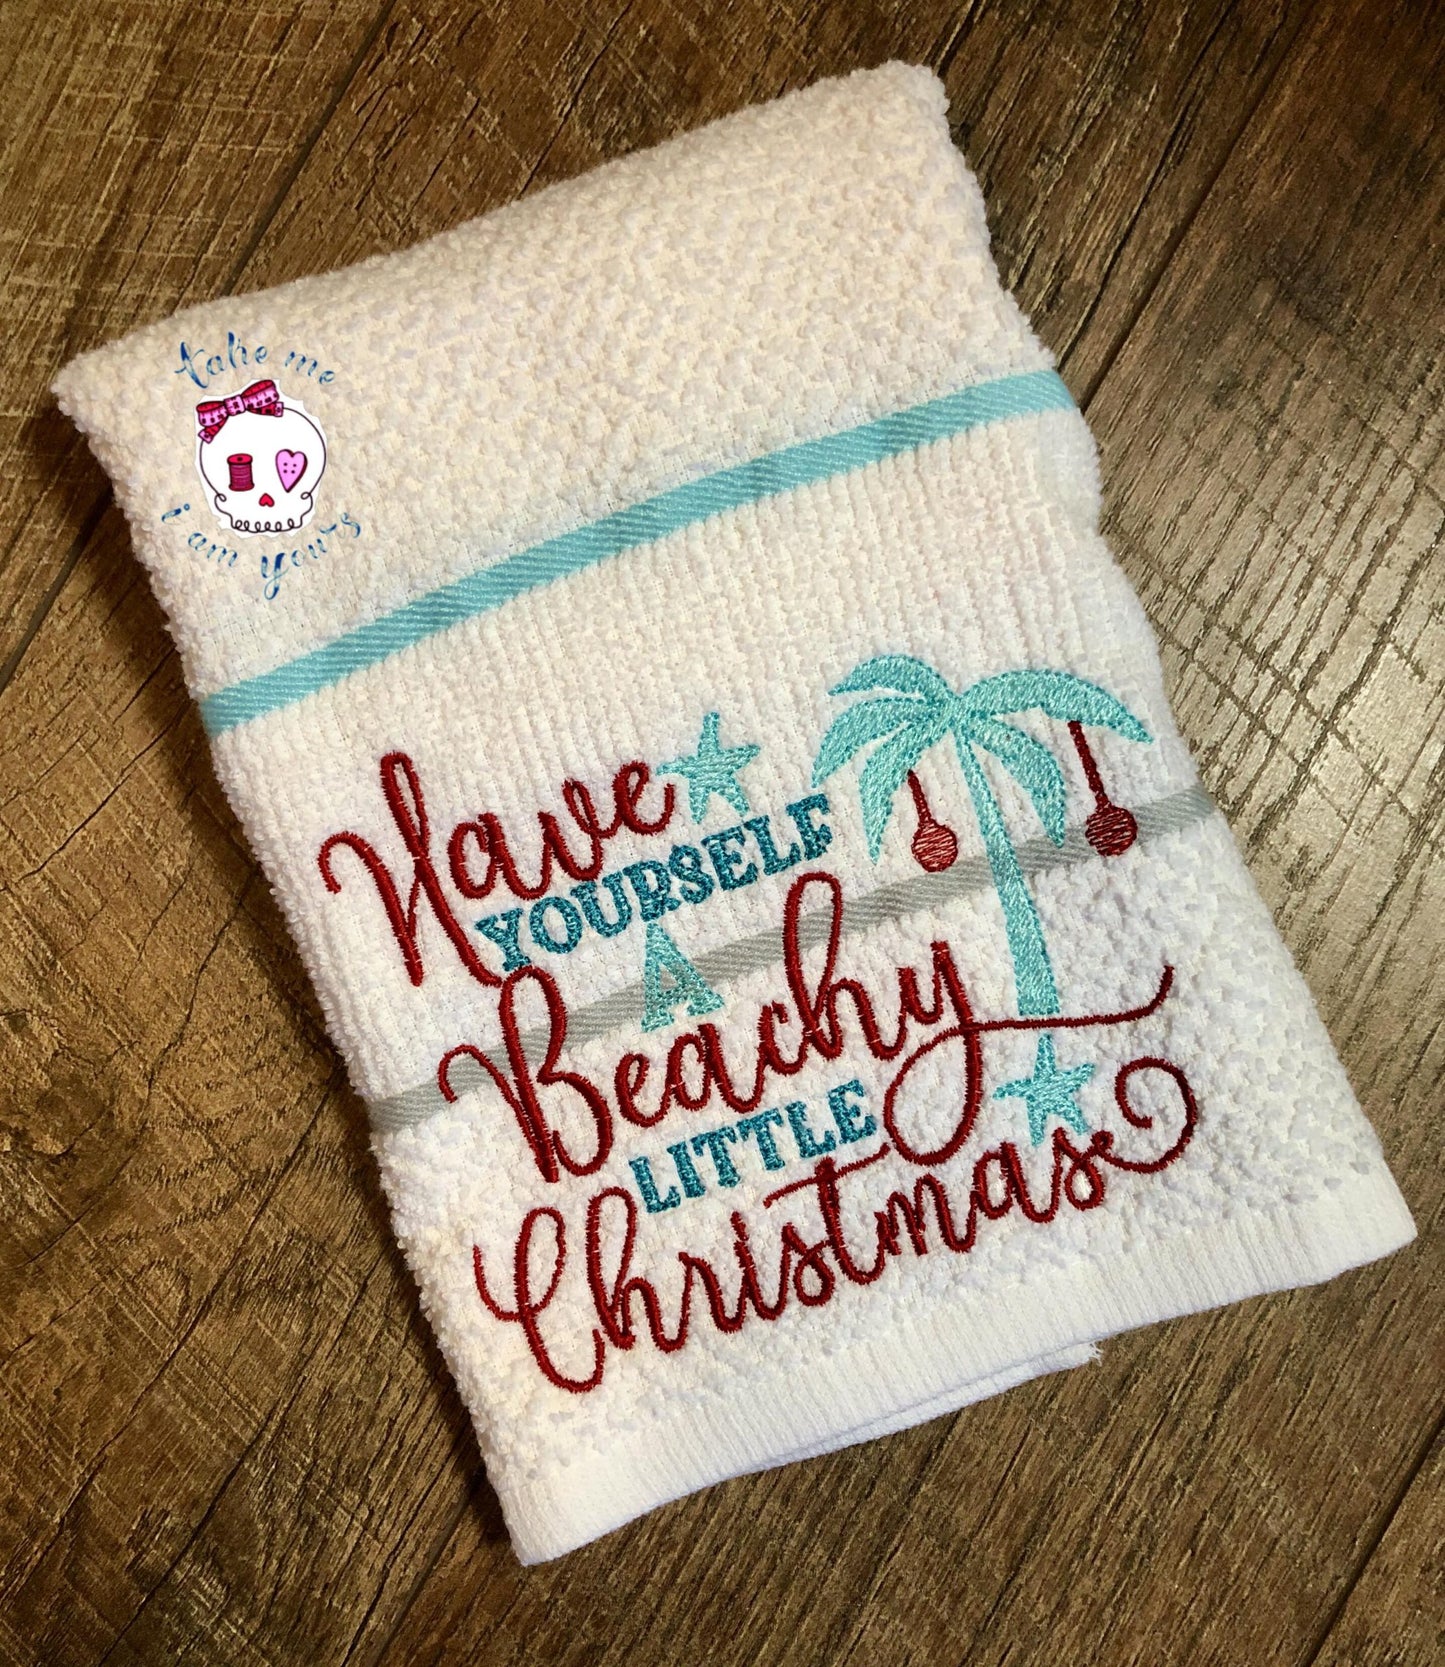 Have Yourself a Beachy Little Christmas -2 sizes - Digital Embroidery Design